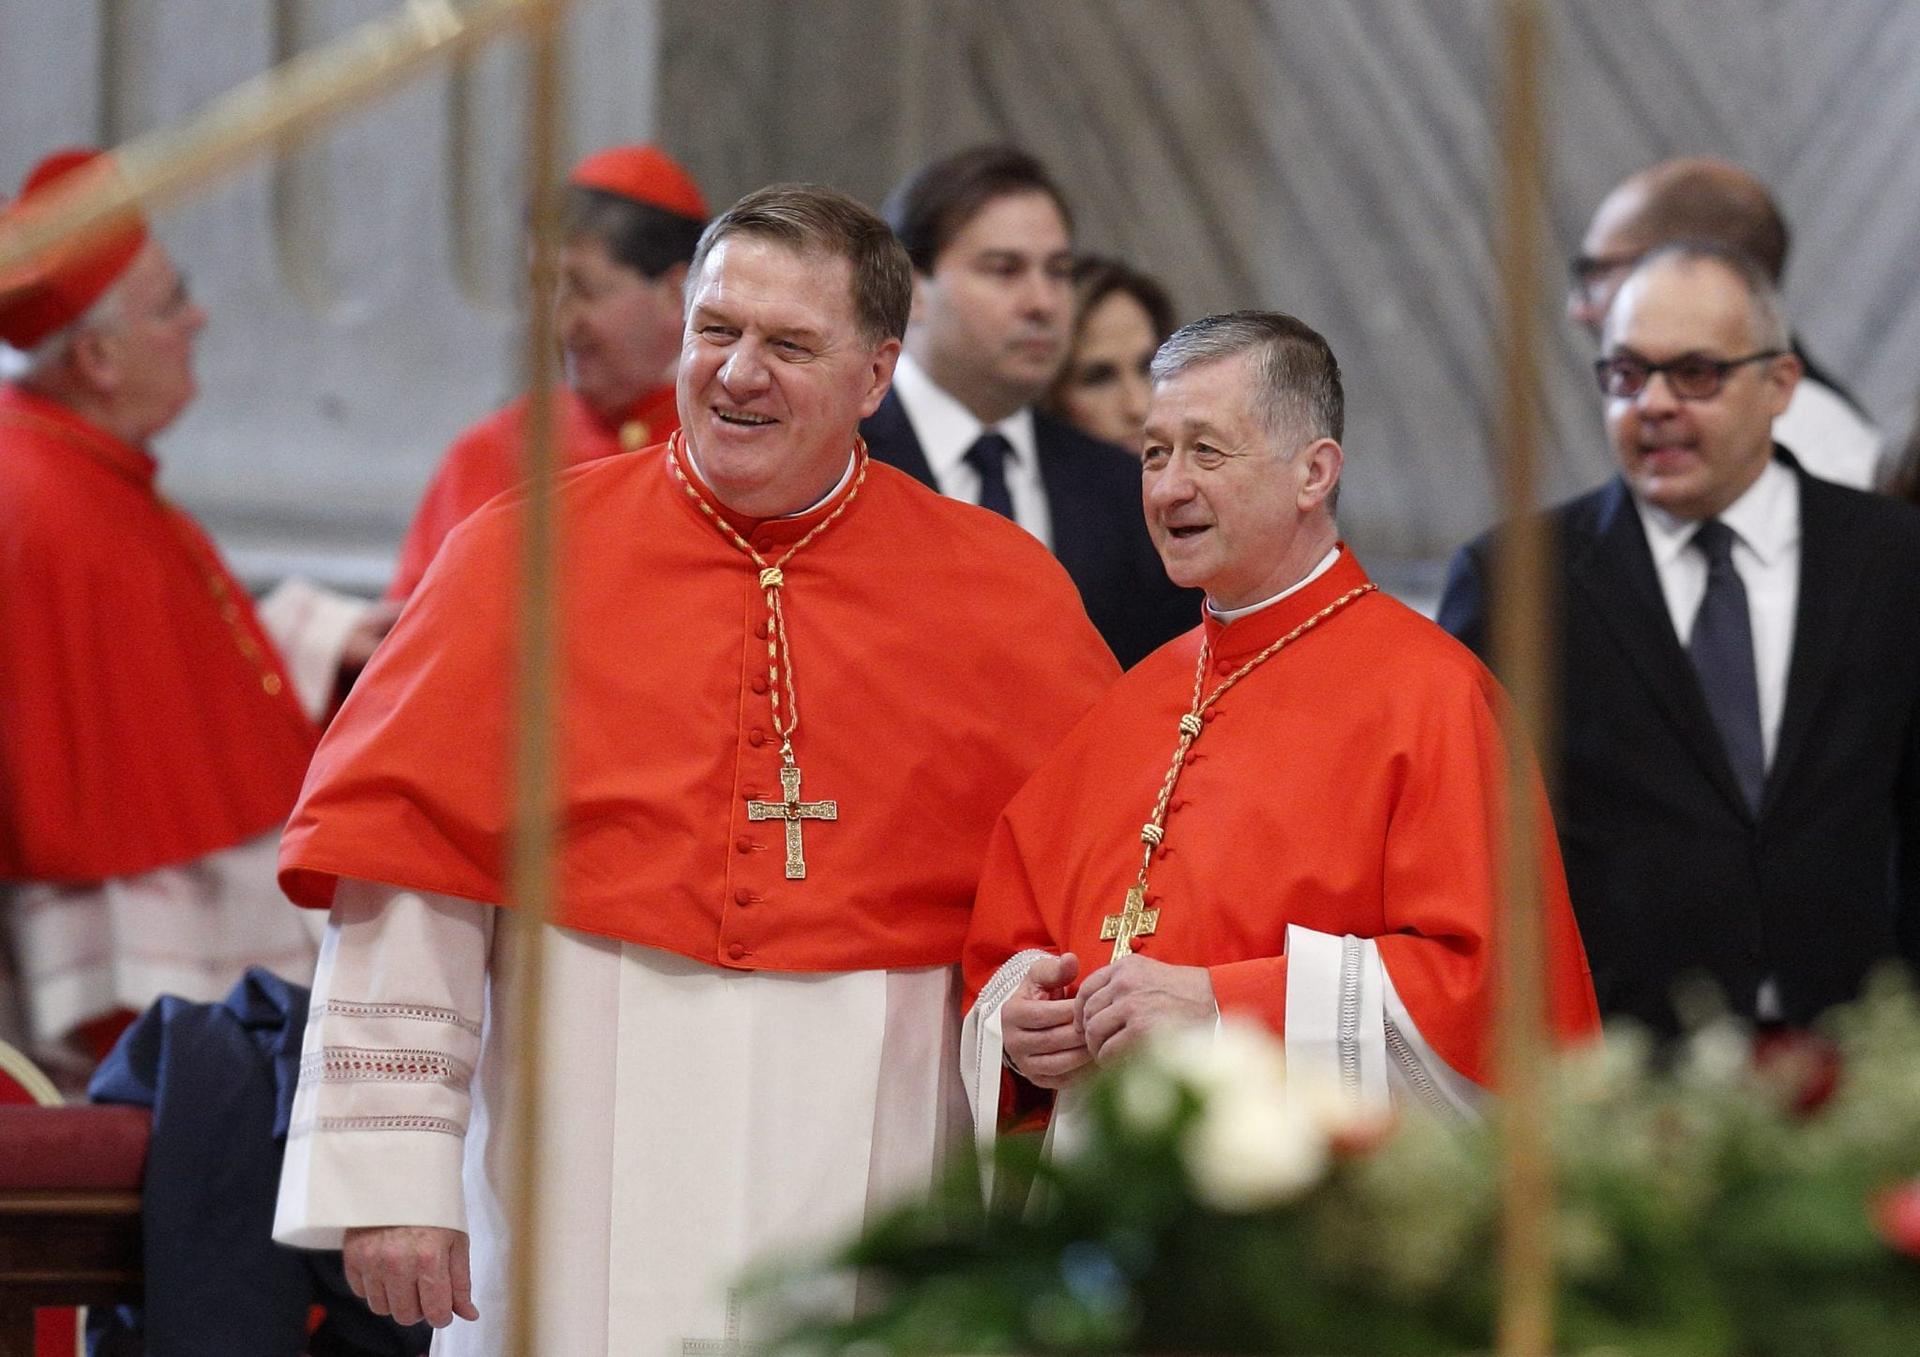 Tobin and Cupich: Battling the bullies; creating a culture of encounter